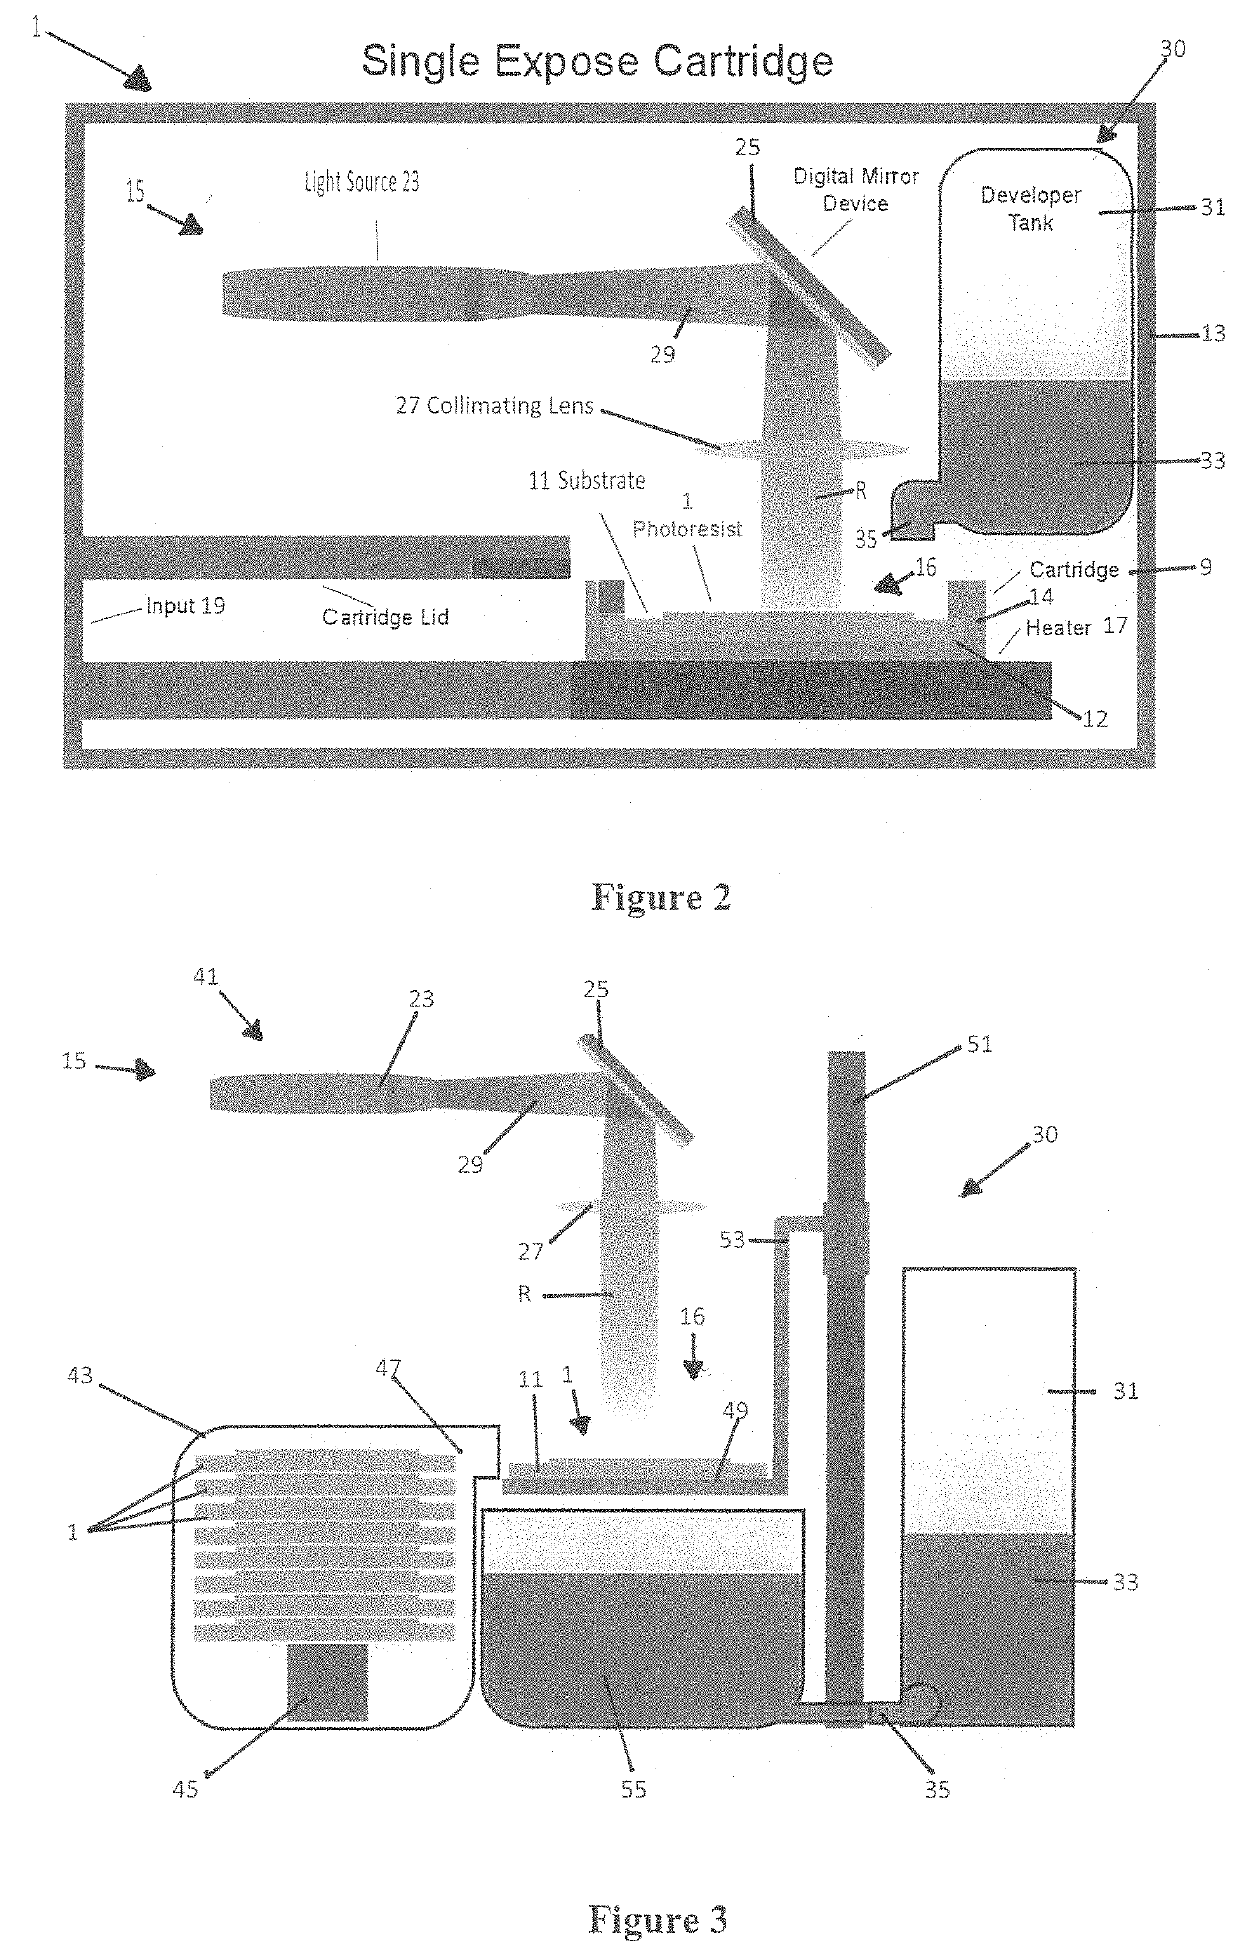 Apparatus for and method of manufacturing an article using photolithography and a photoresist